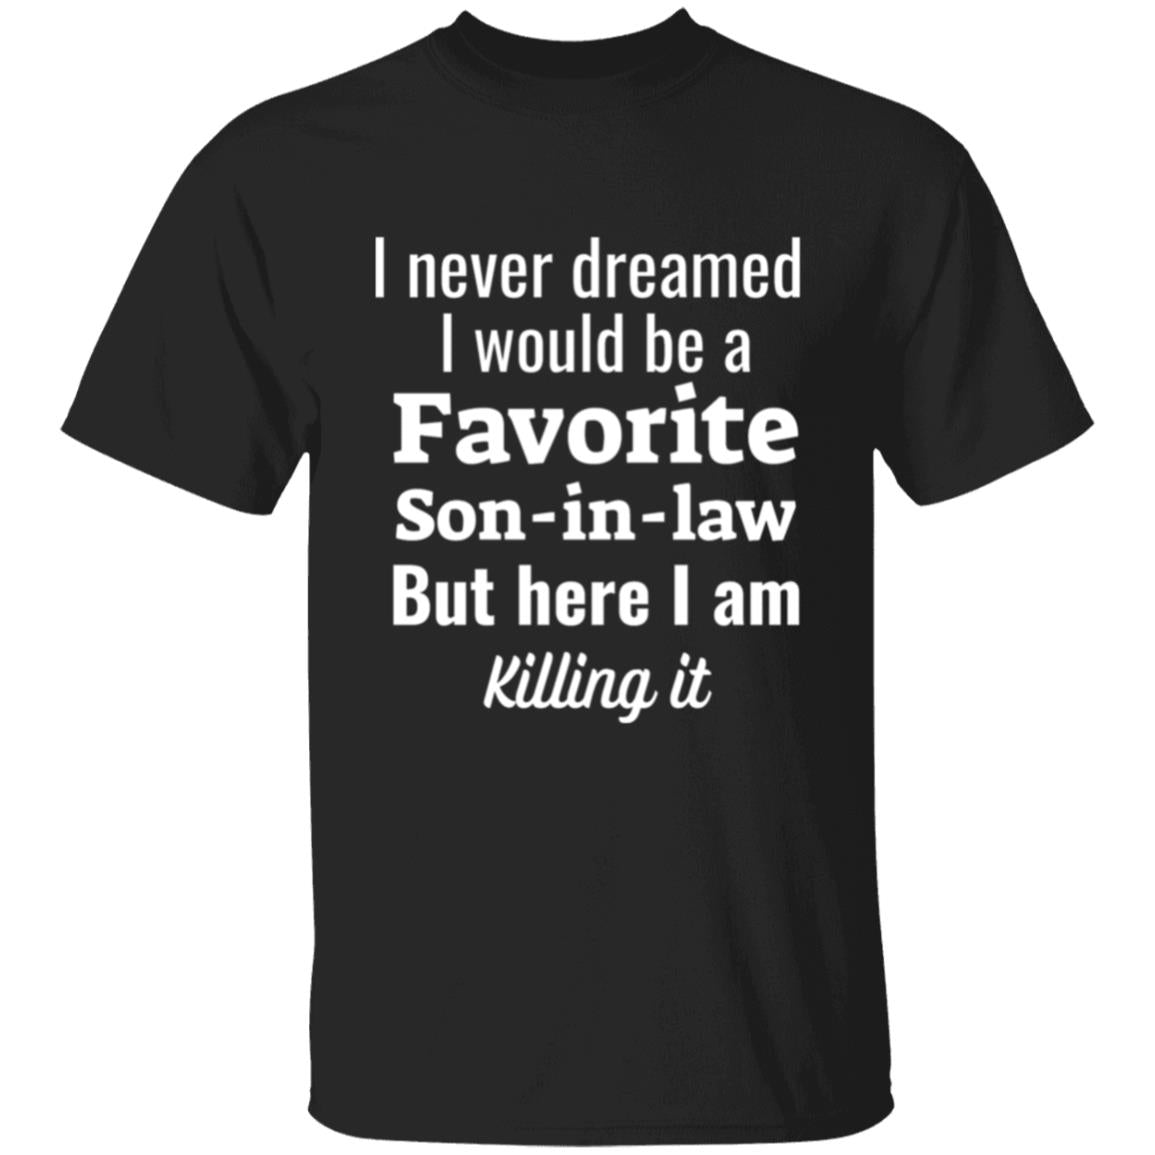 Get trendy with I never dreamed white text Favorite son-in-law front print, white text T-Shirt - T-Shirts available at Good Gift Company. Grab yours for $22.95 today!